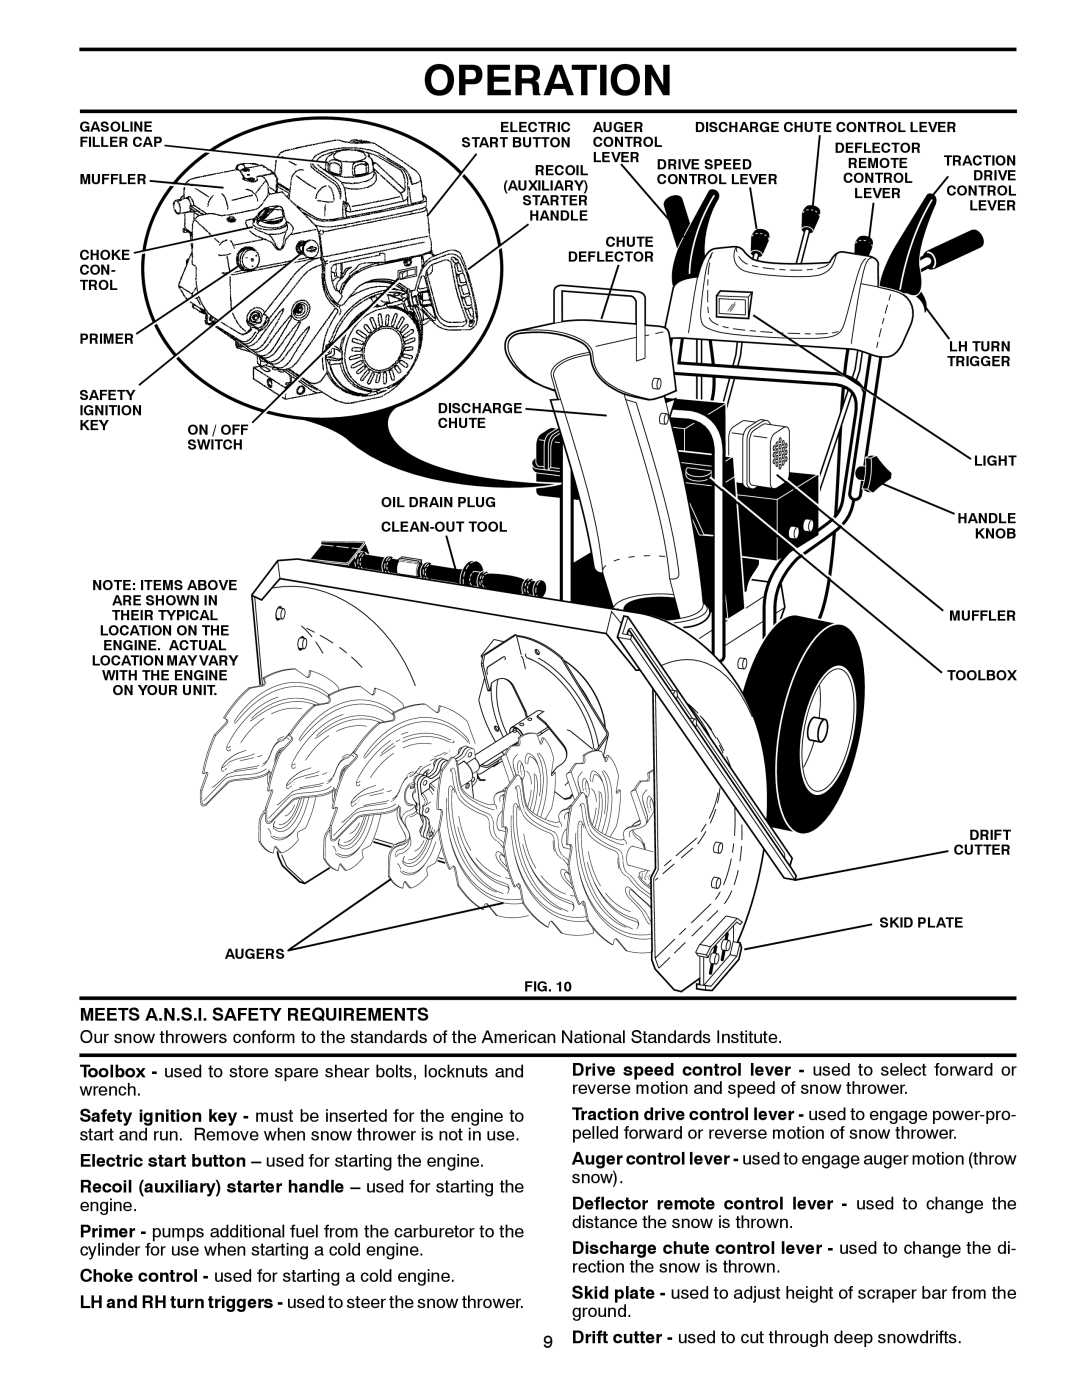 Husqvarna 10527SB-LS owner manual Operation, Meets A.N.S.I. Safety Requirements 